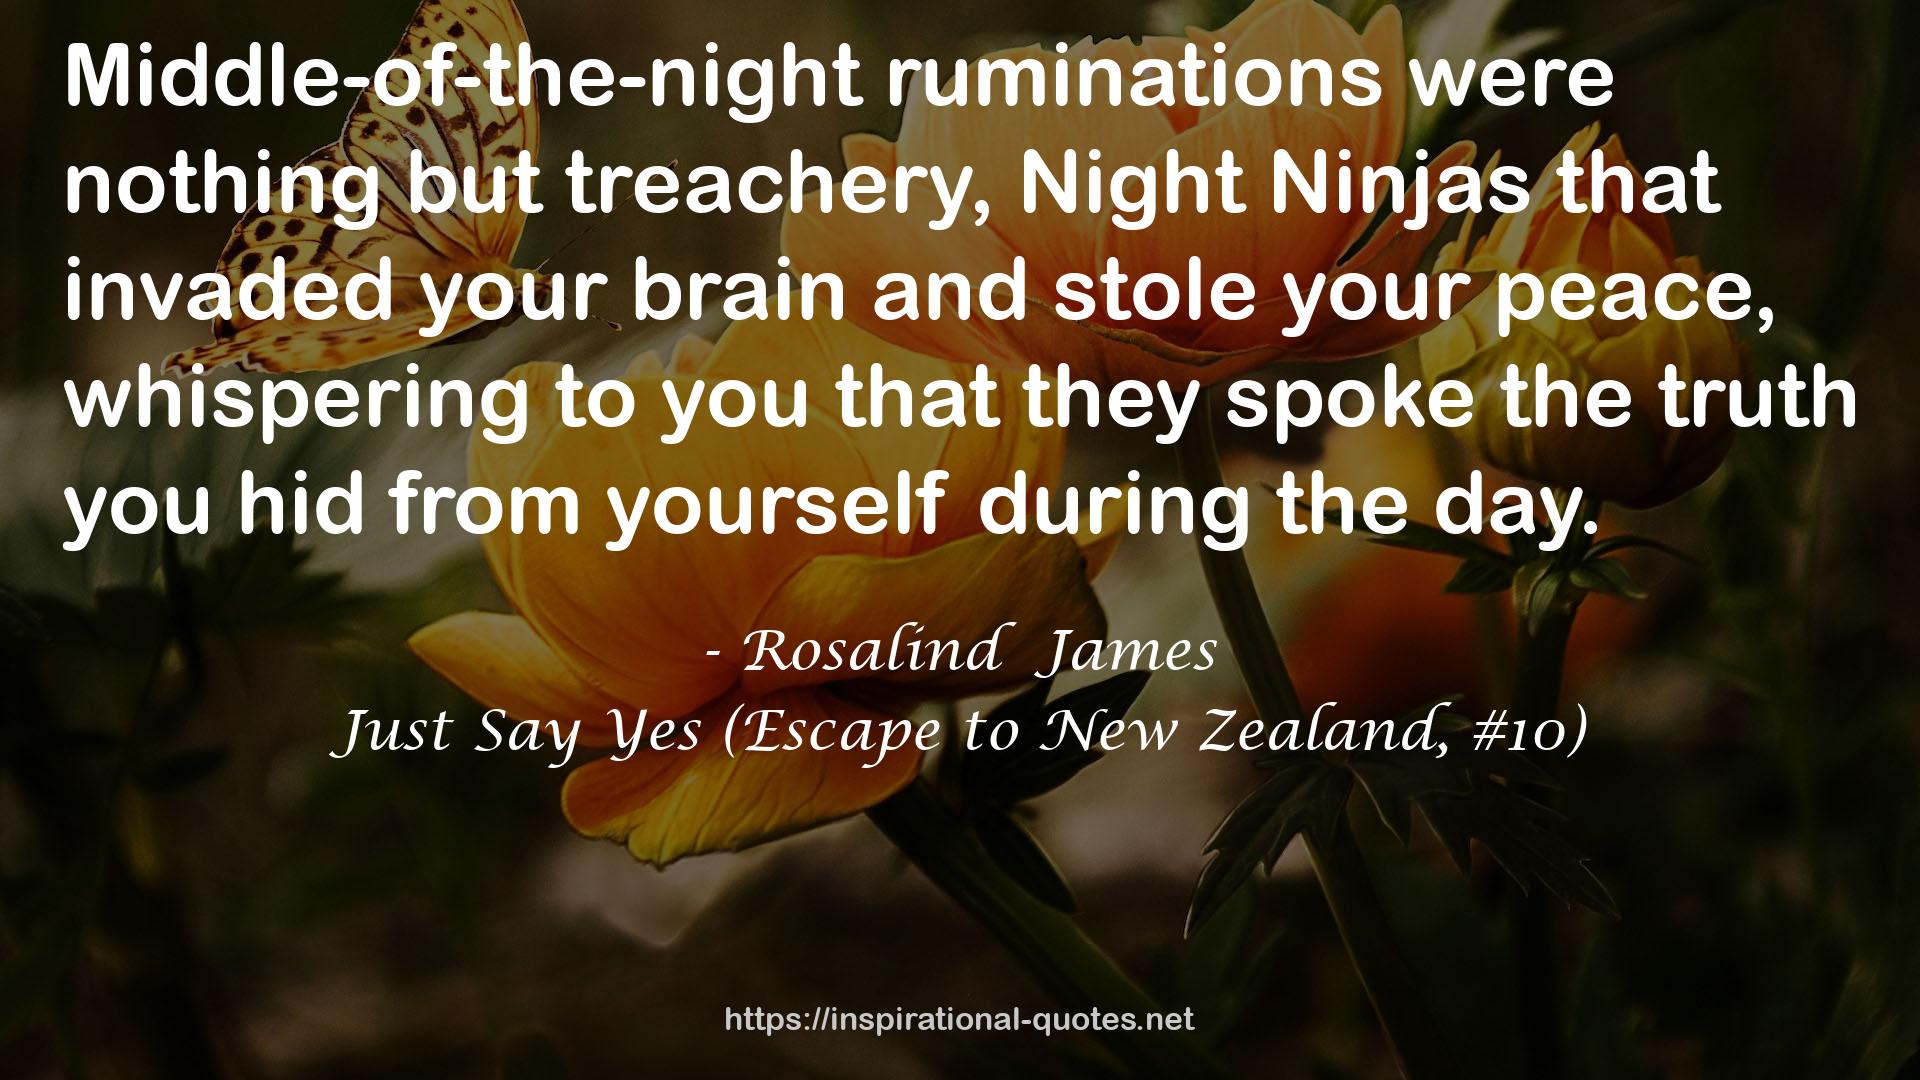 Just Say Yes (Escape to New Zealand, #10) QUOTES